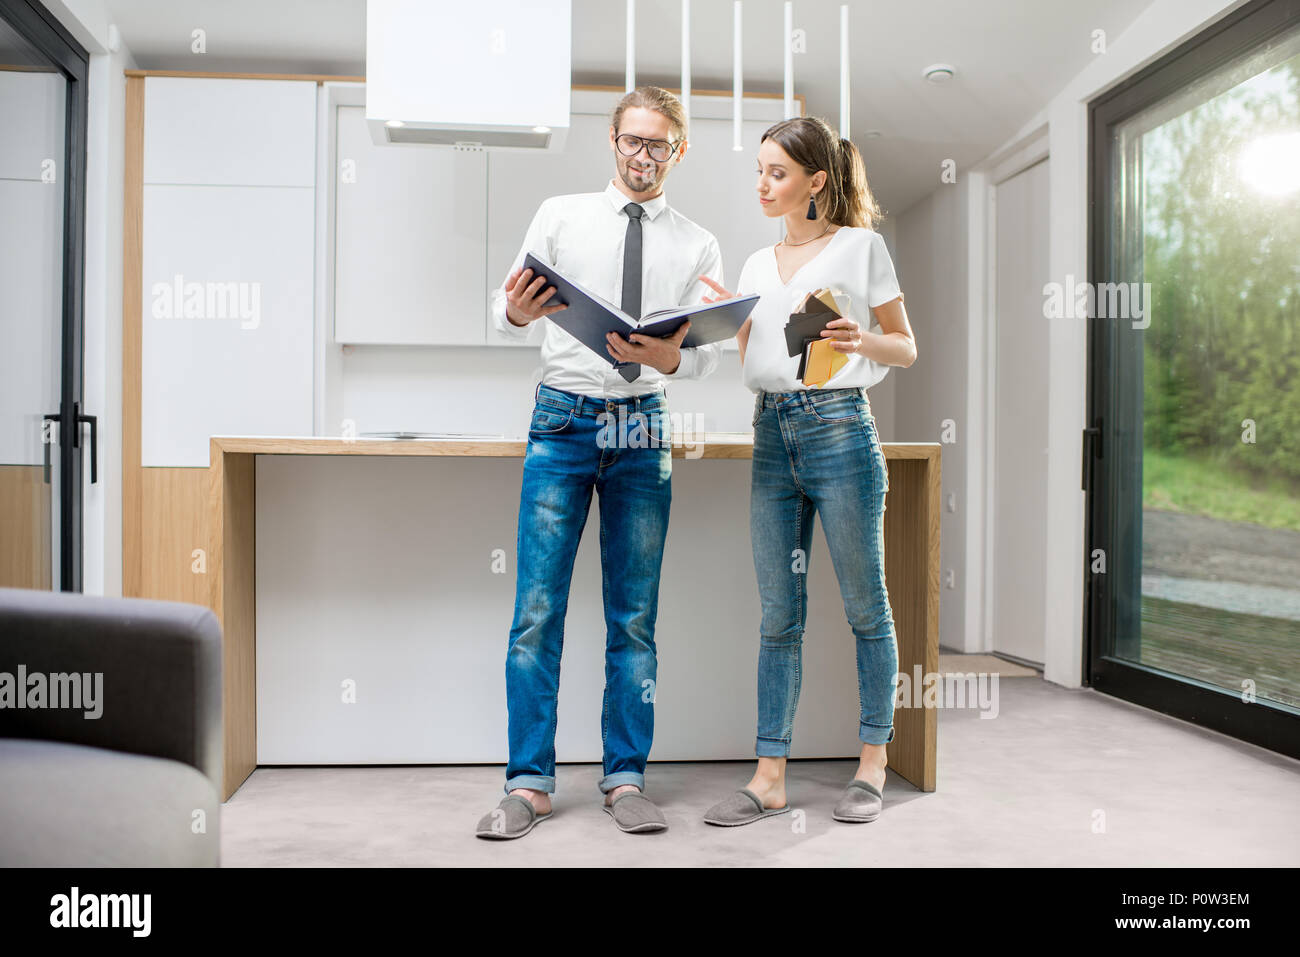 Young couple with book in the modern kitchen interior Stock Photo